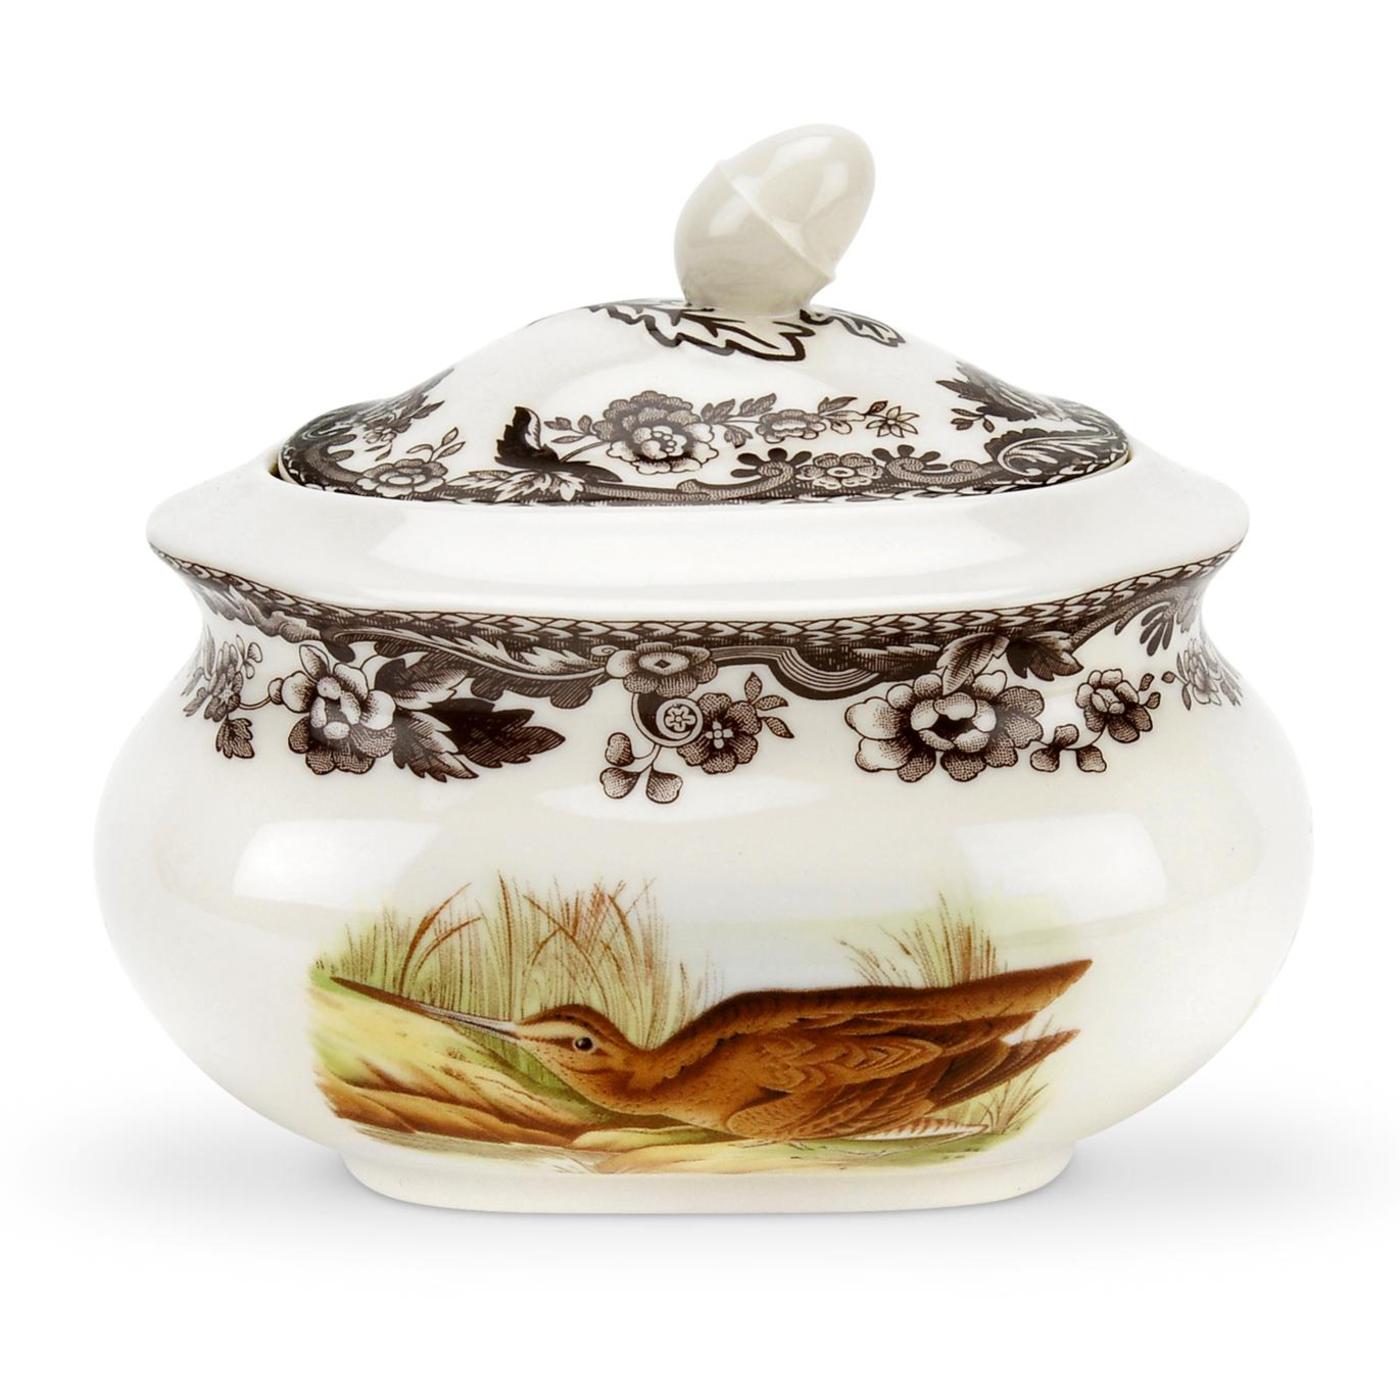 Spode Woodland Covered Sugar Bowl, Snipe/Pintail